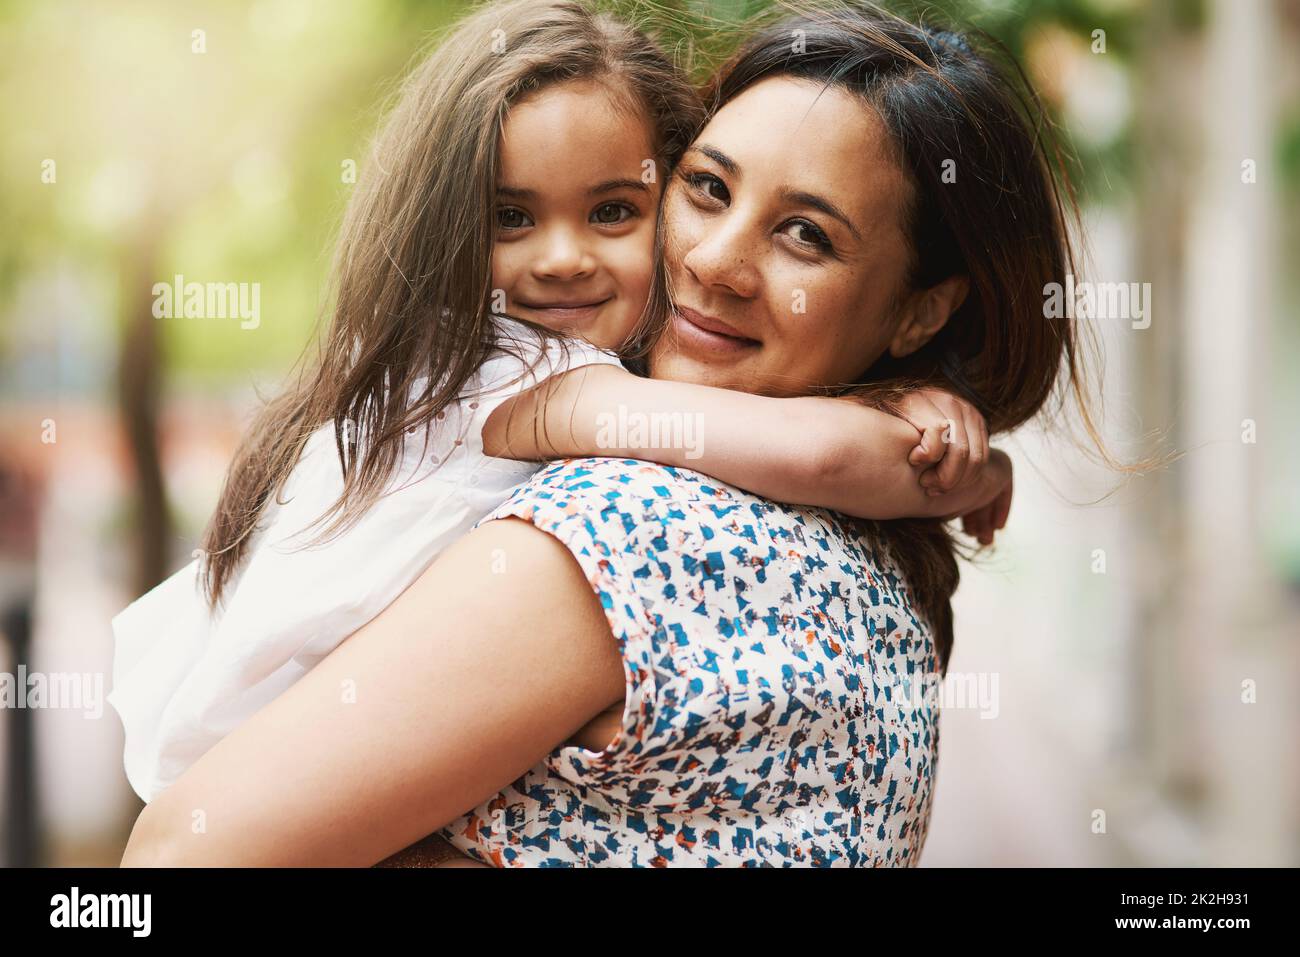 Being together is all that matters. Shot of a young mother bonding with her daughter. Stock Photo